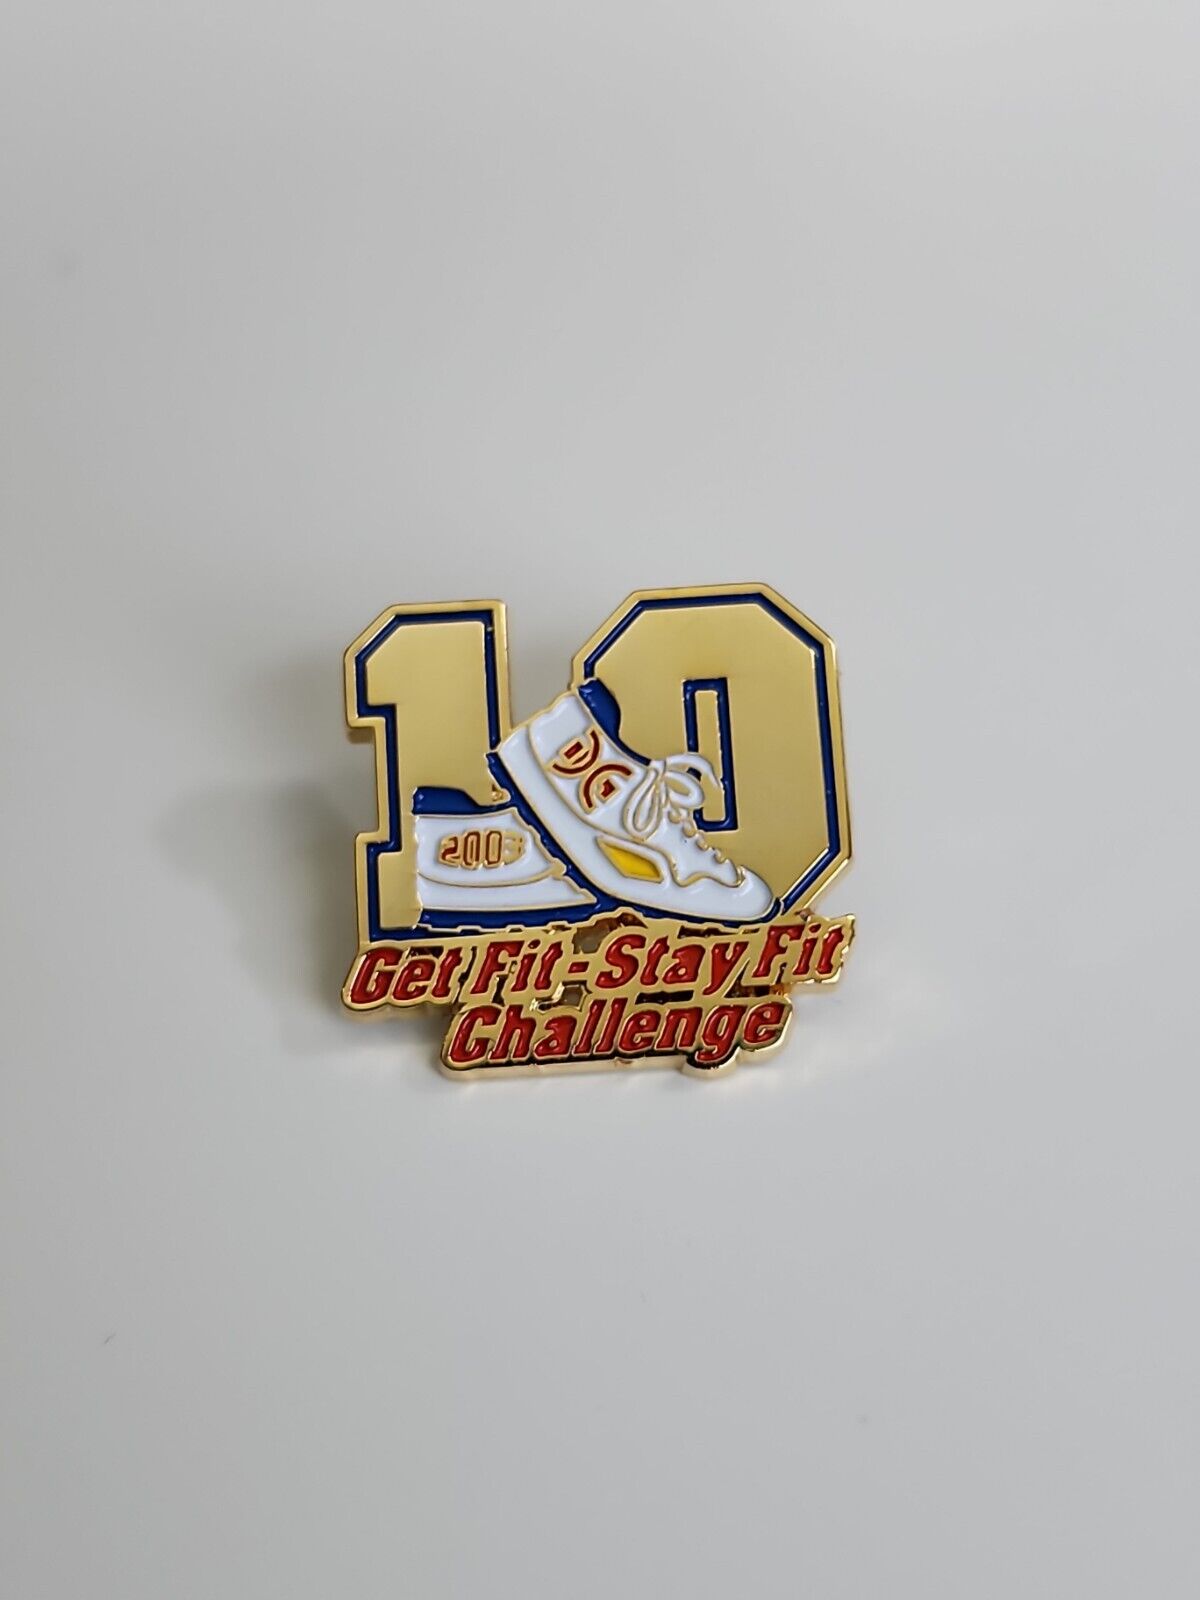 Get Fit Stay Fit Challenge Lapel Pin 